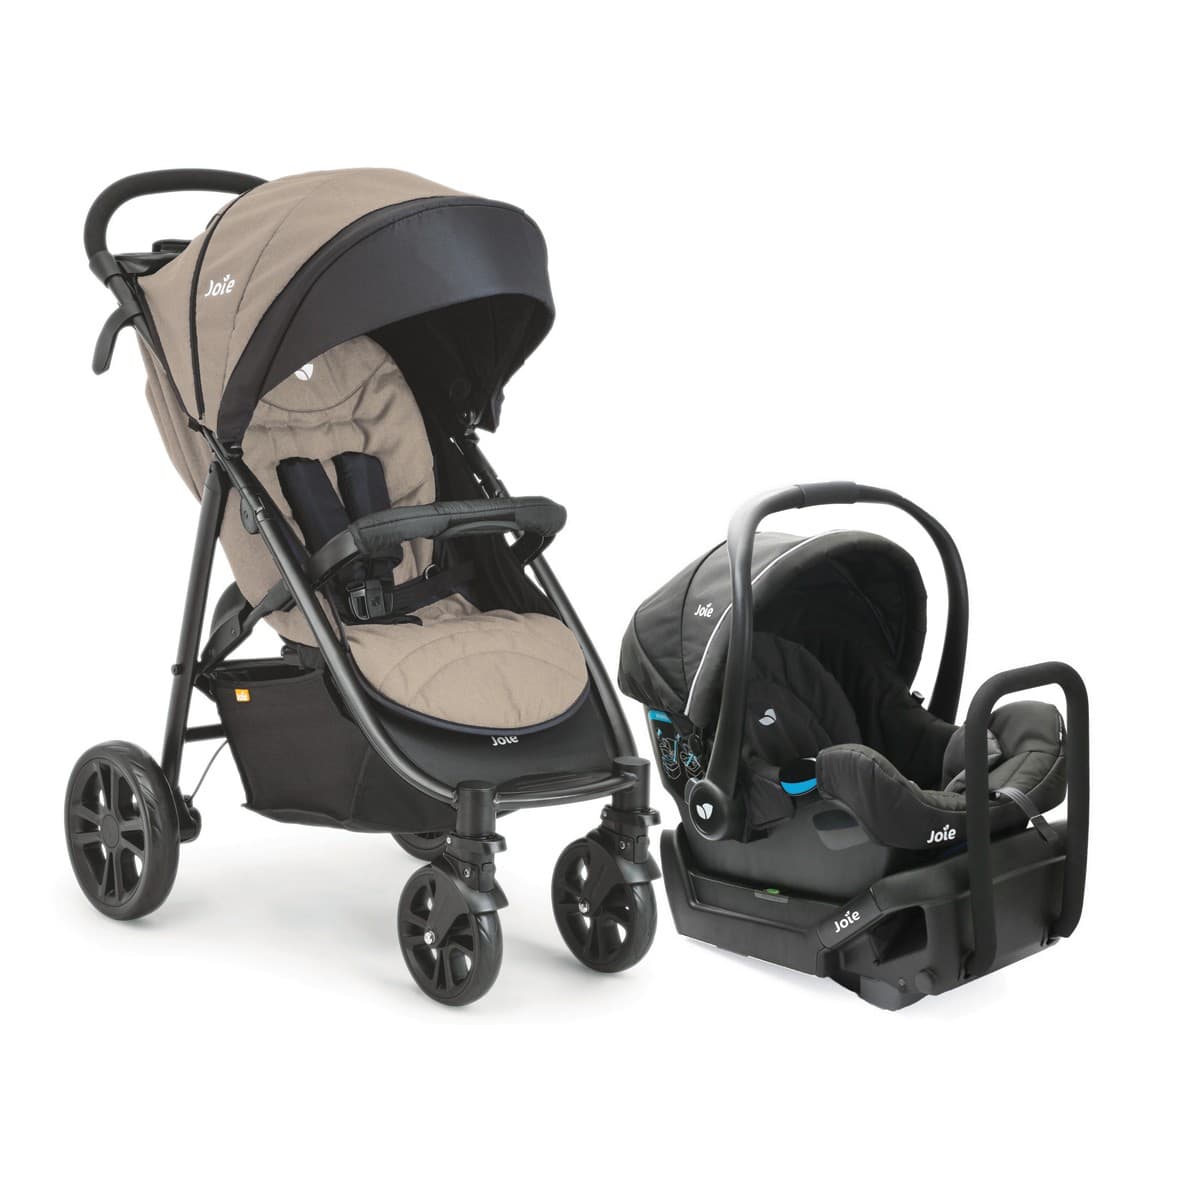 Joie Litetrax 4 Travel System Stroller and Gemm Capsule with Base ...